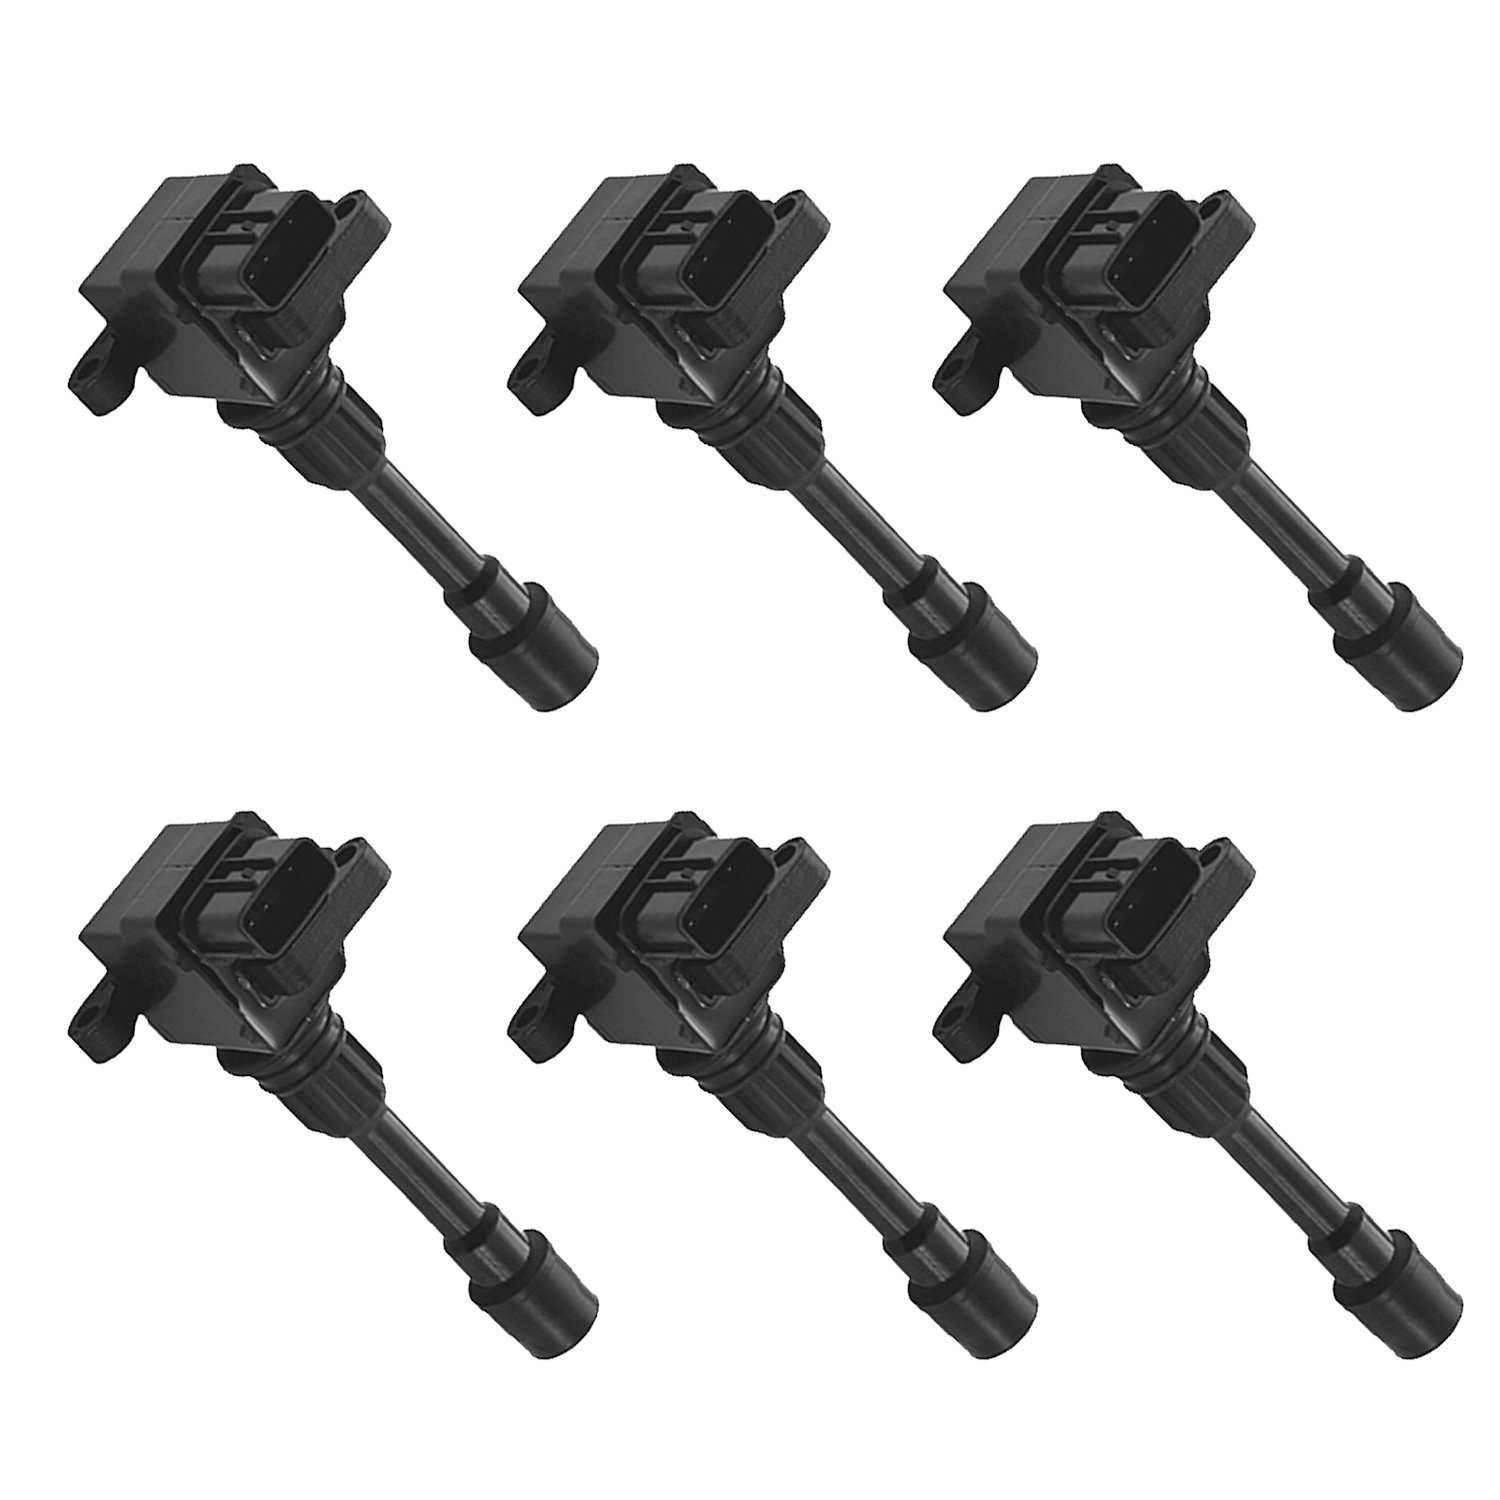 OE Replacement Ignition Coils for 1995-2002 Mazda Millenia 2.3L V6 C1012